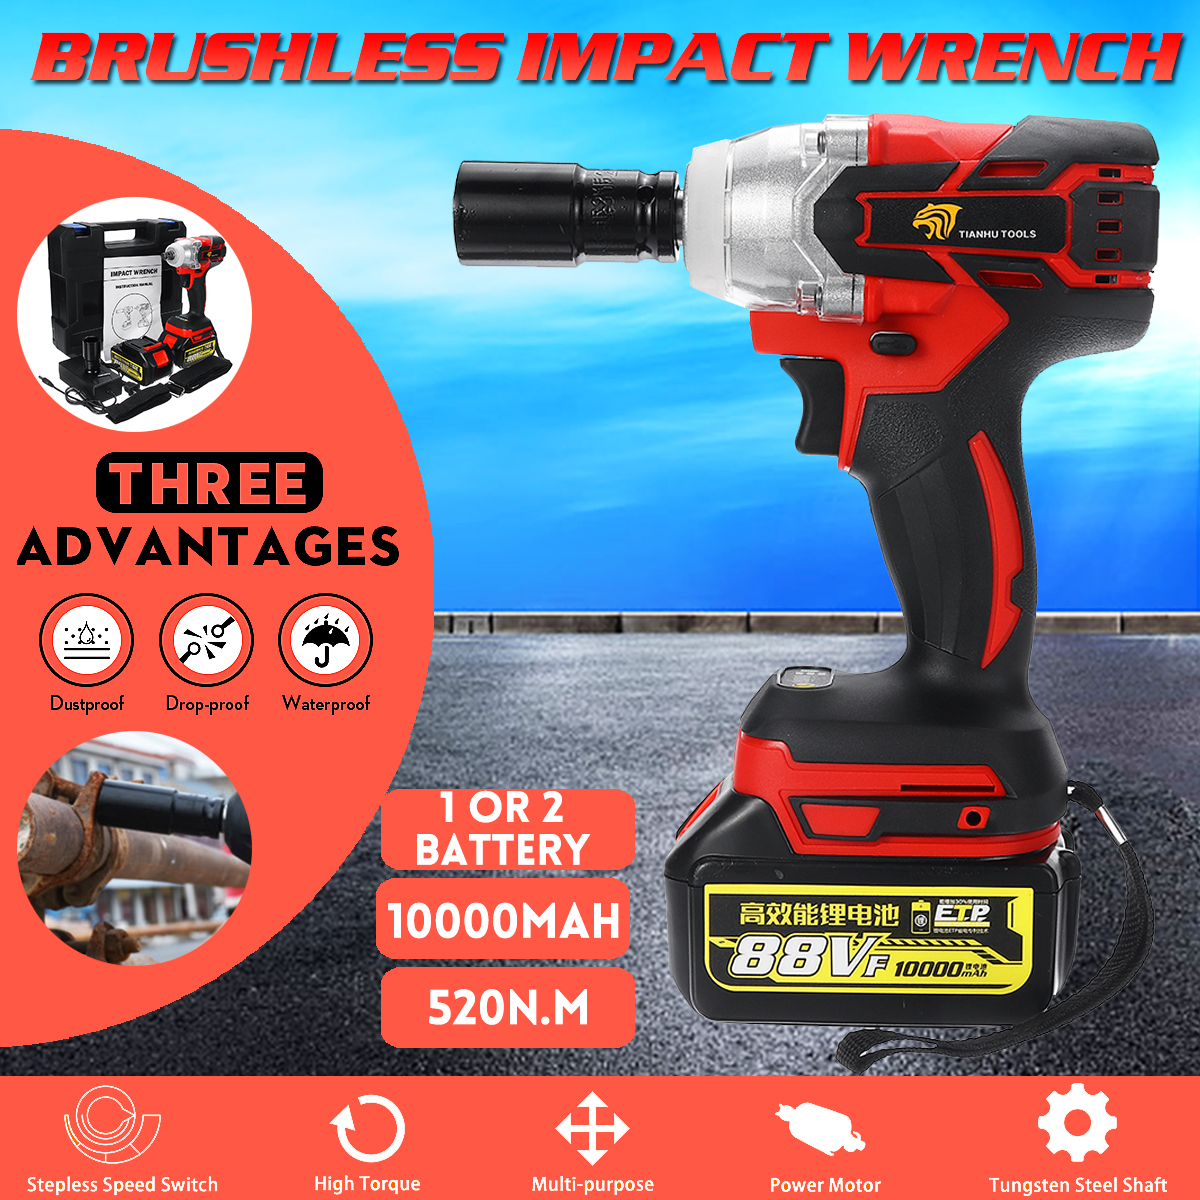 88VF-10000mAh-520NM-High-Torque-Cordless-Brushless-Electric-Wrench-with-Rechargeable-Battery-1782562-1